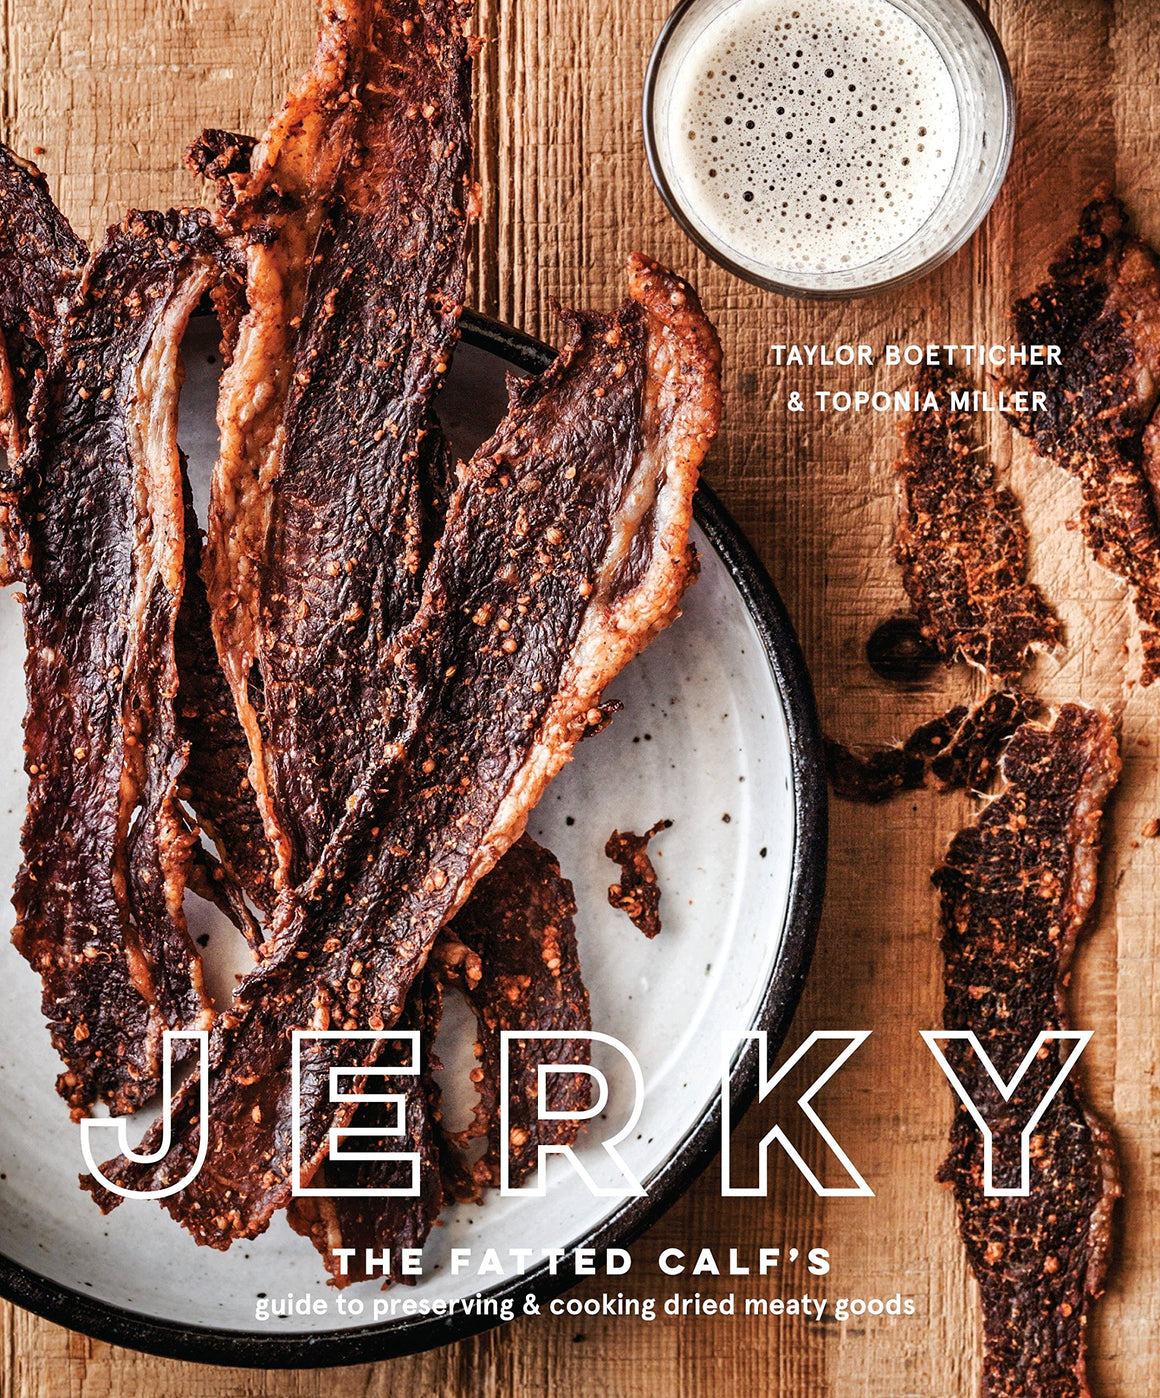 (Charcuterie) Taylor Boetticher and Toponia Miller. Jerky: The Fatted Calf's Guide to Preserving and Cooking Dried Meaty Goods.